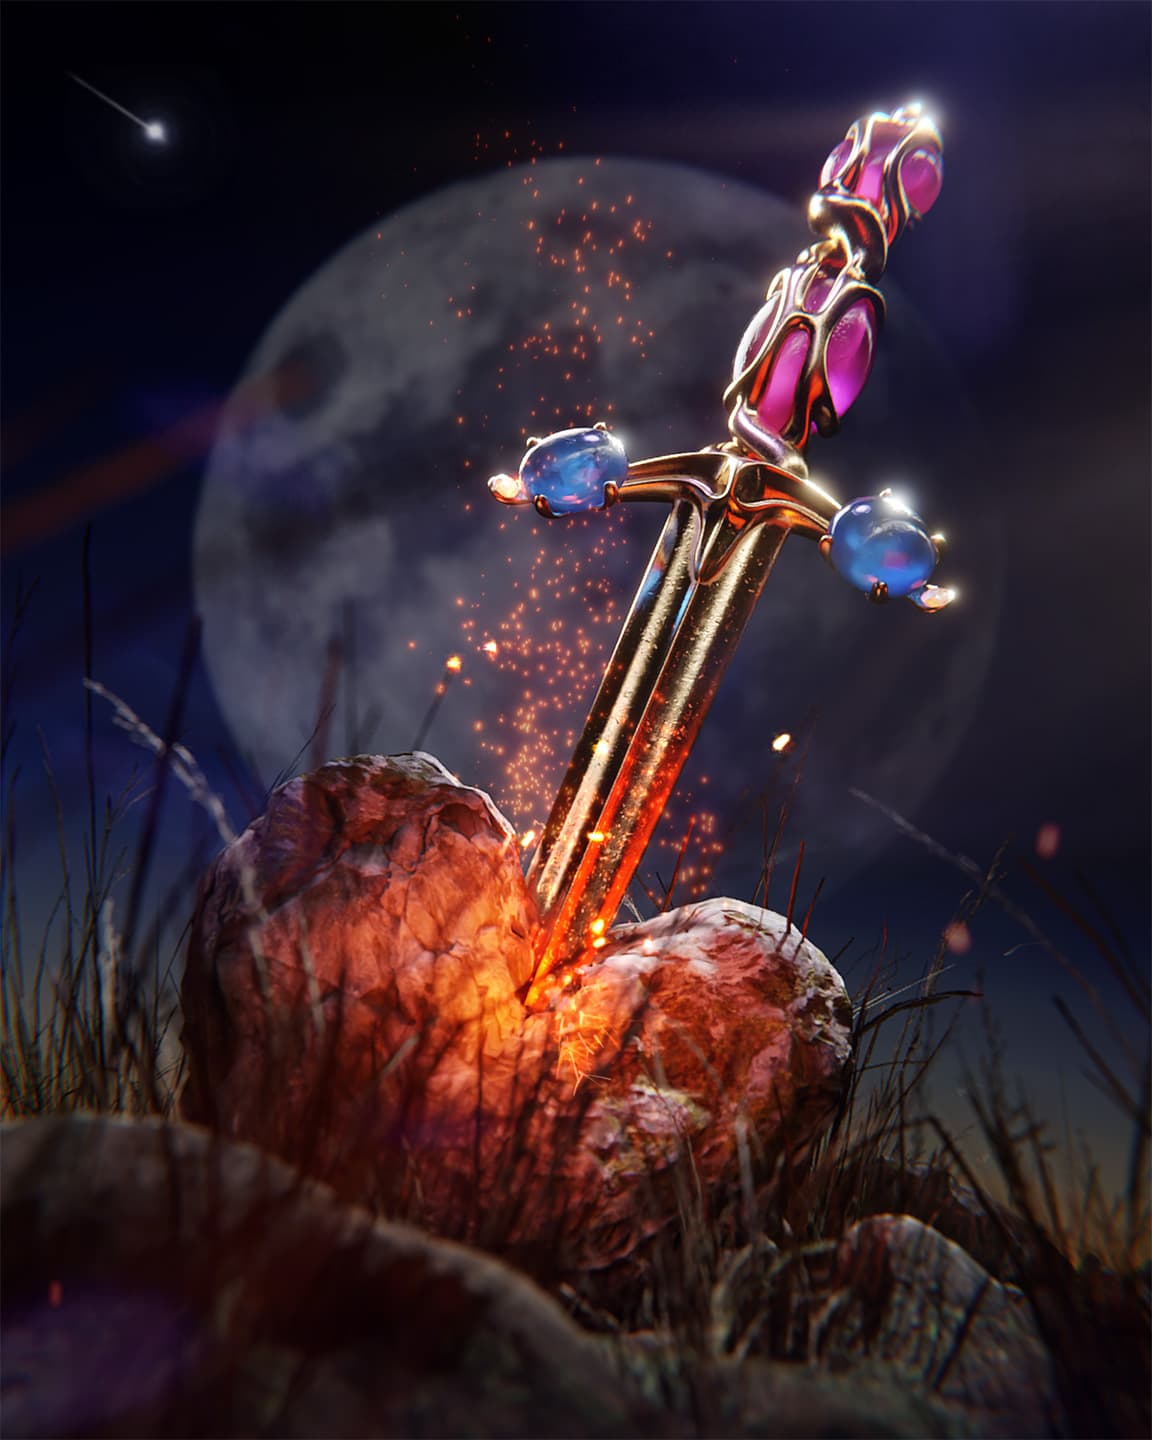 CGI image of a sword coming out from a stone